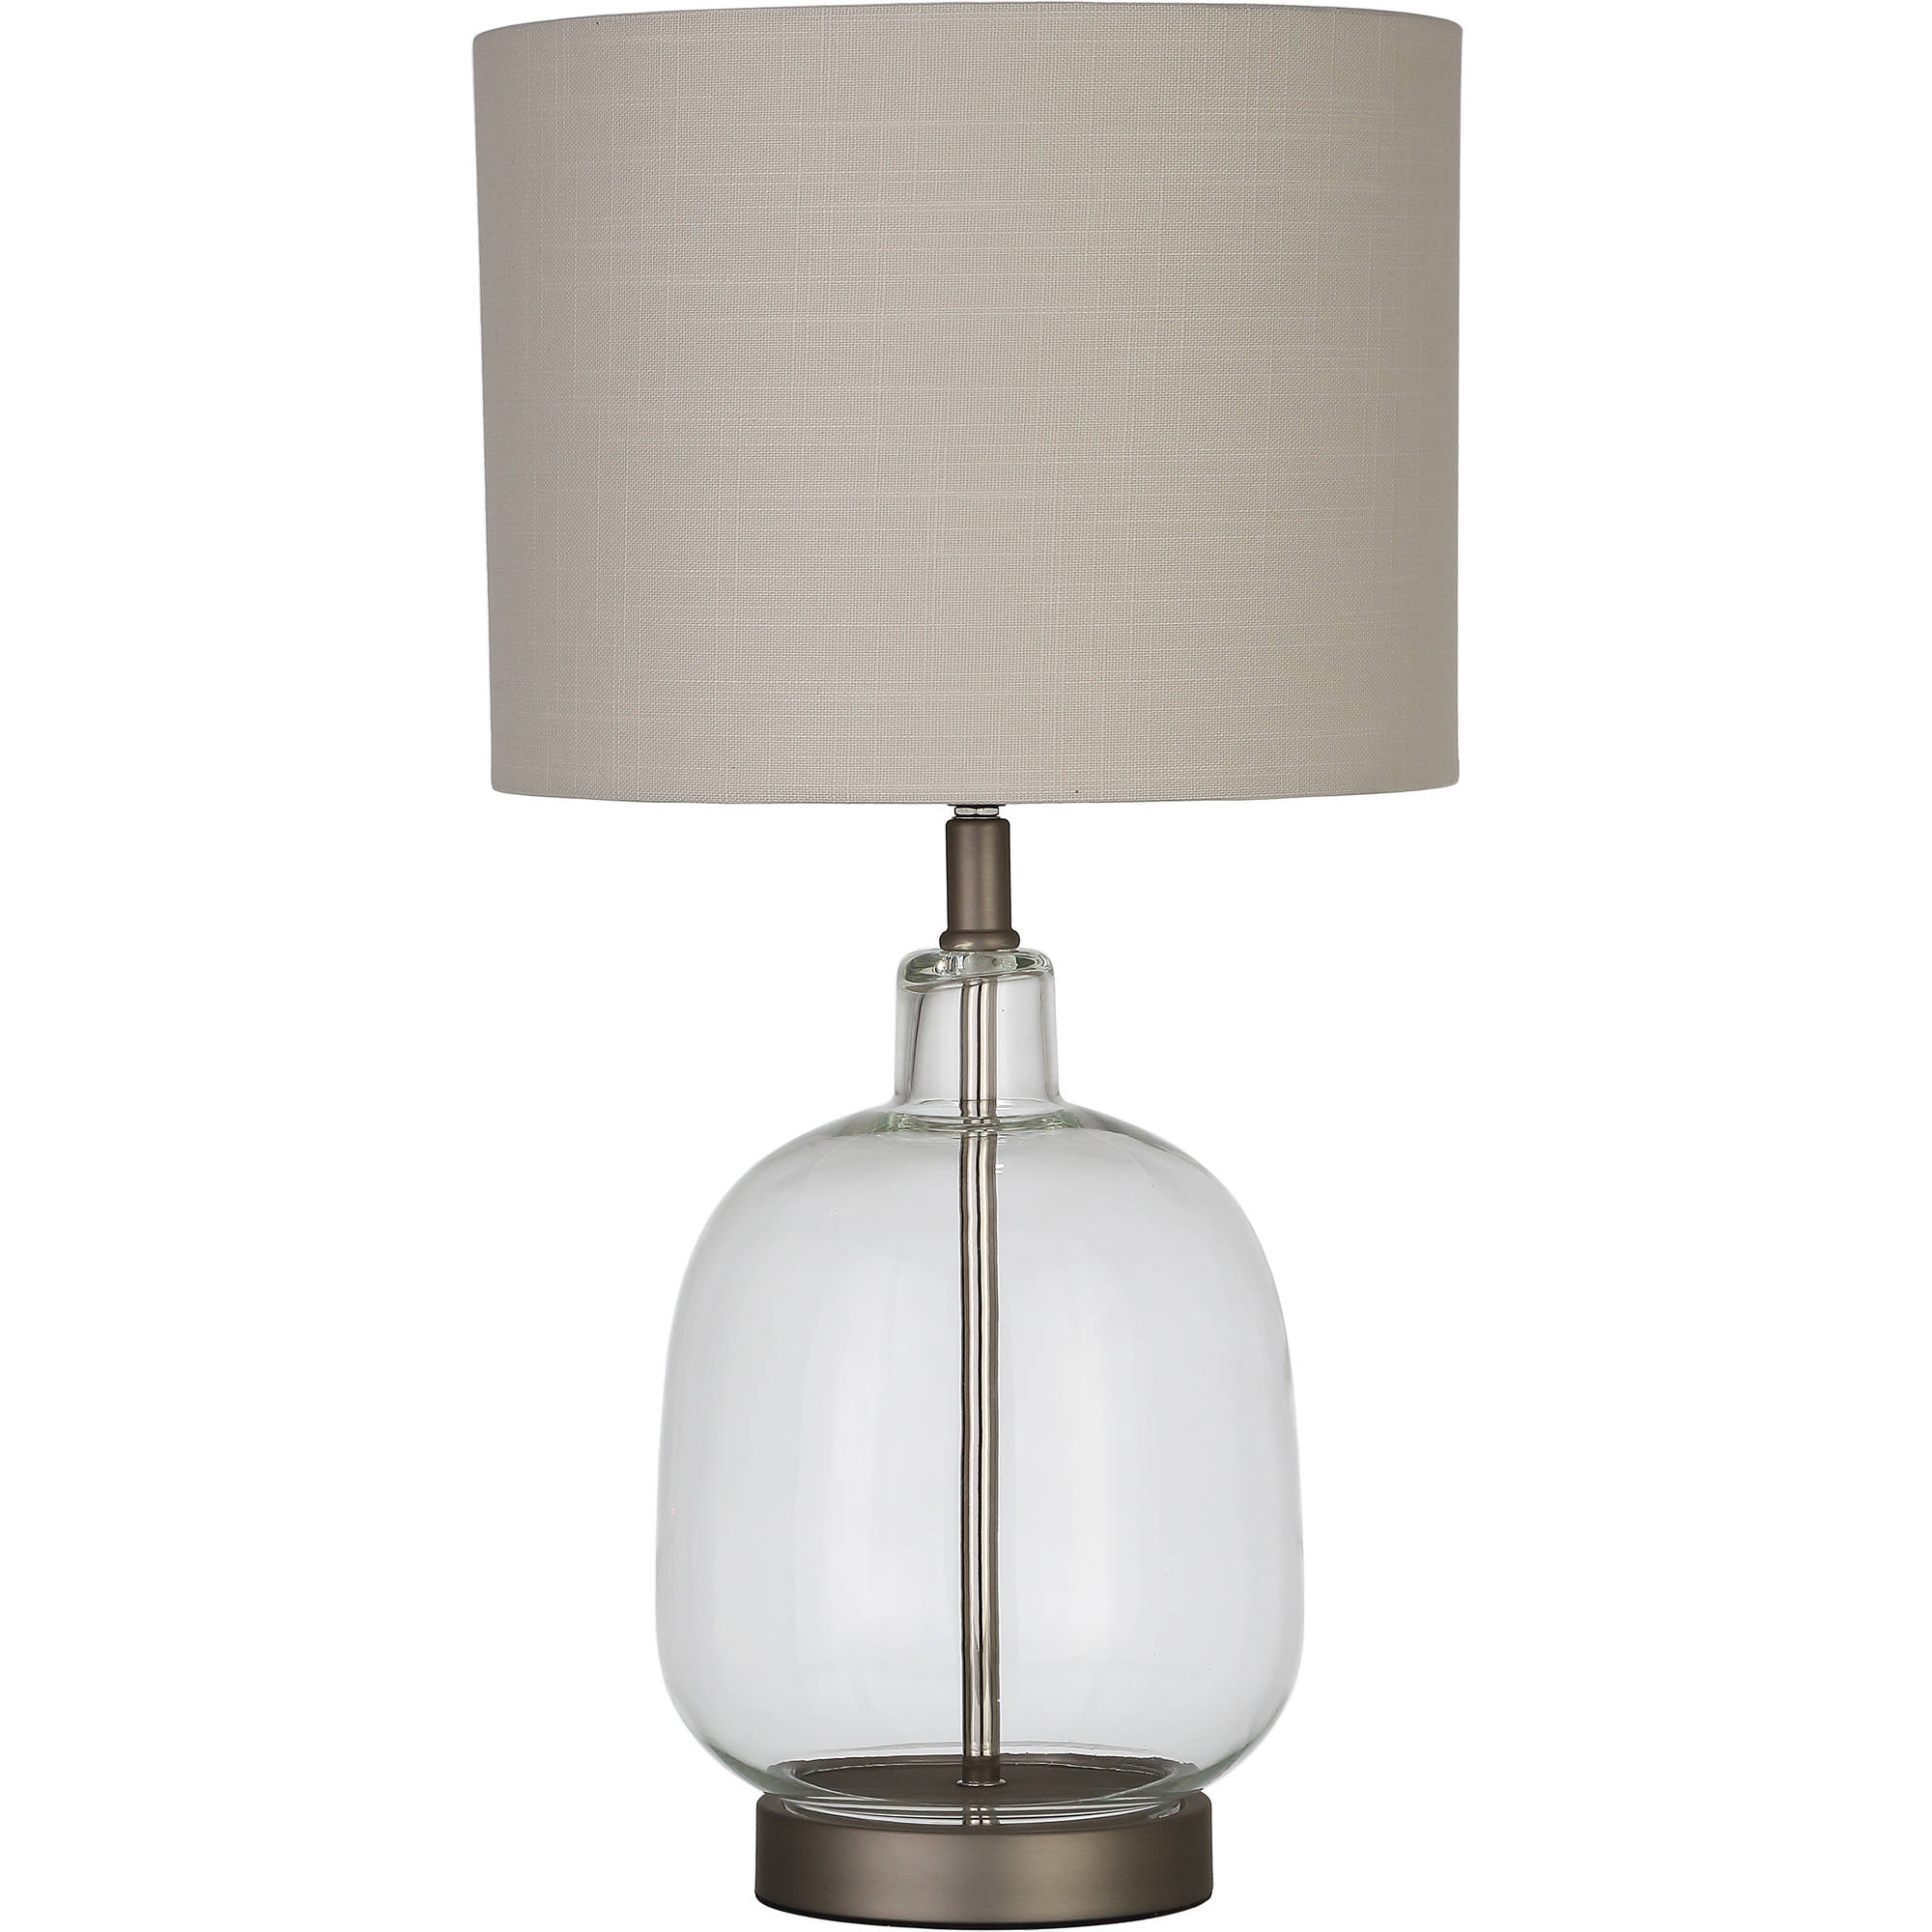 Better Homes & Gardens Clear Glass Table Lamp - image 1 of 1